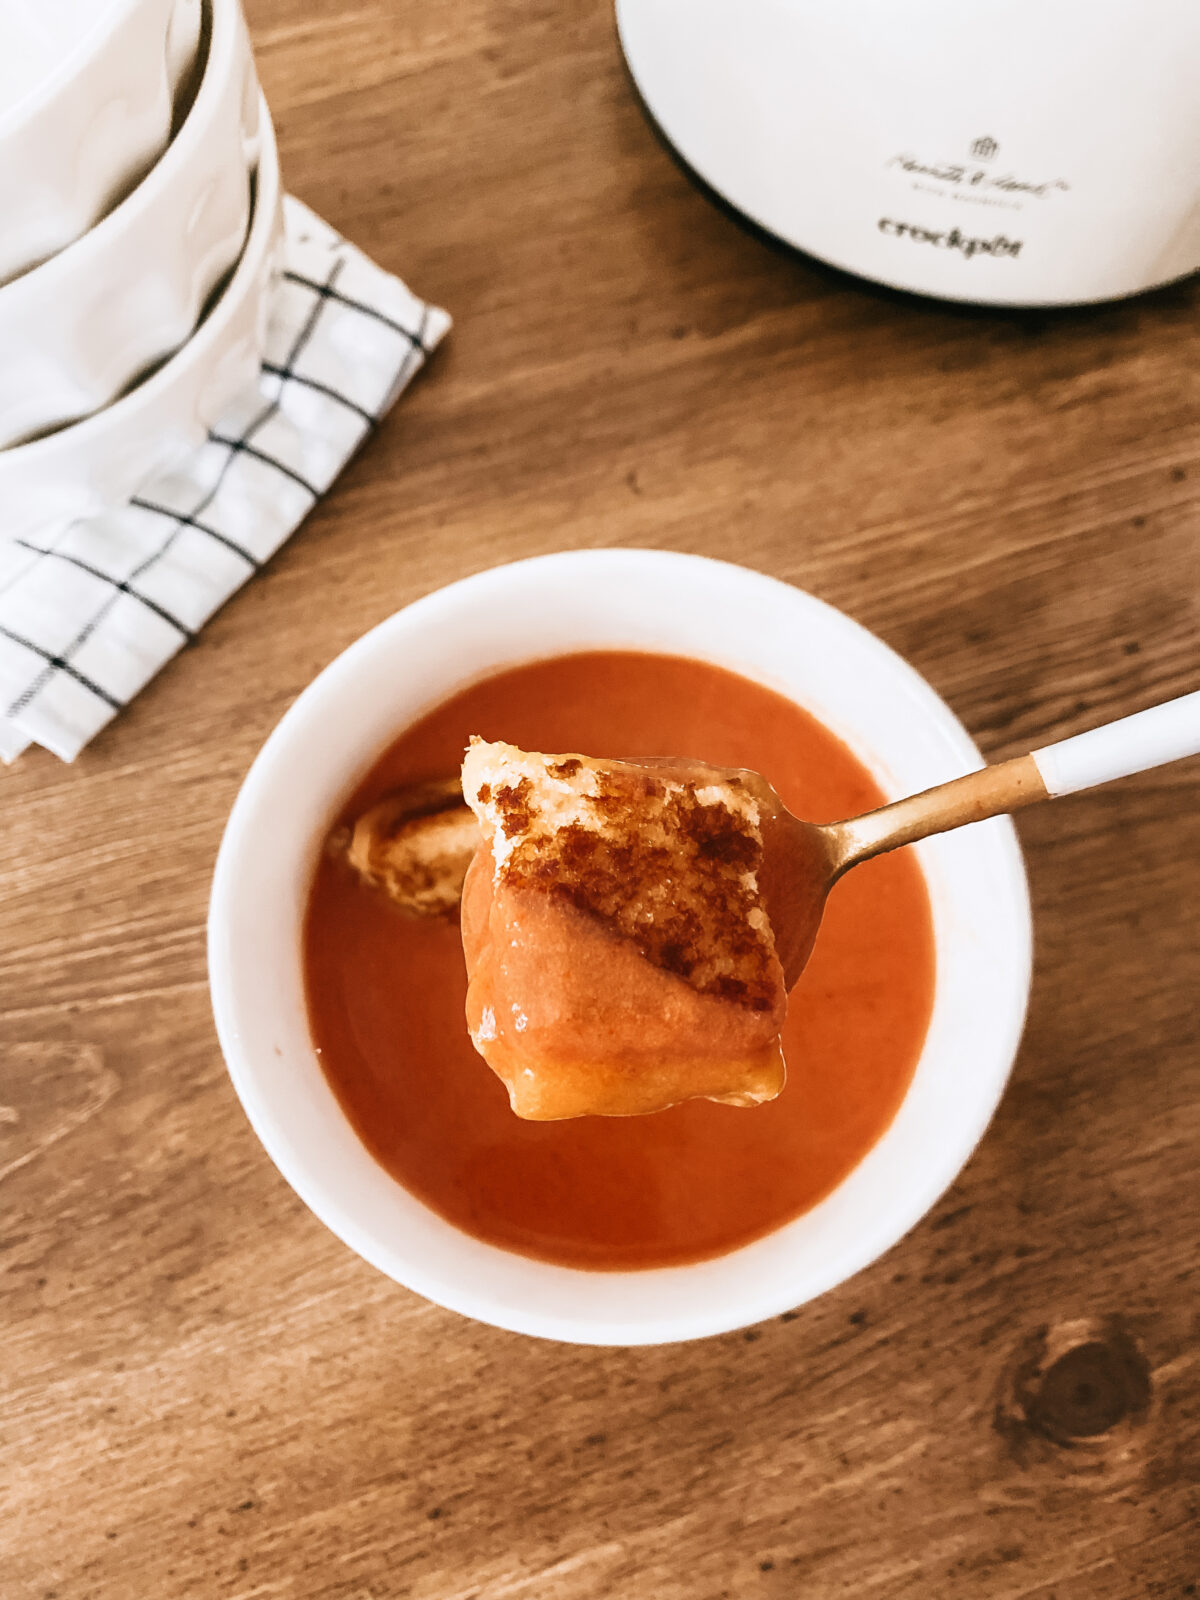 homemade tomato soup with grilled cheese croutons on wooden table
